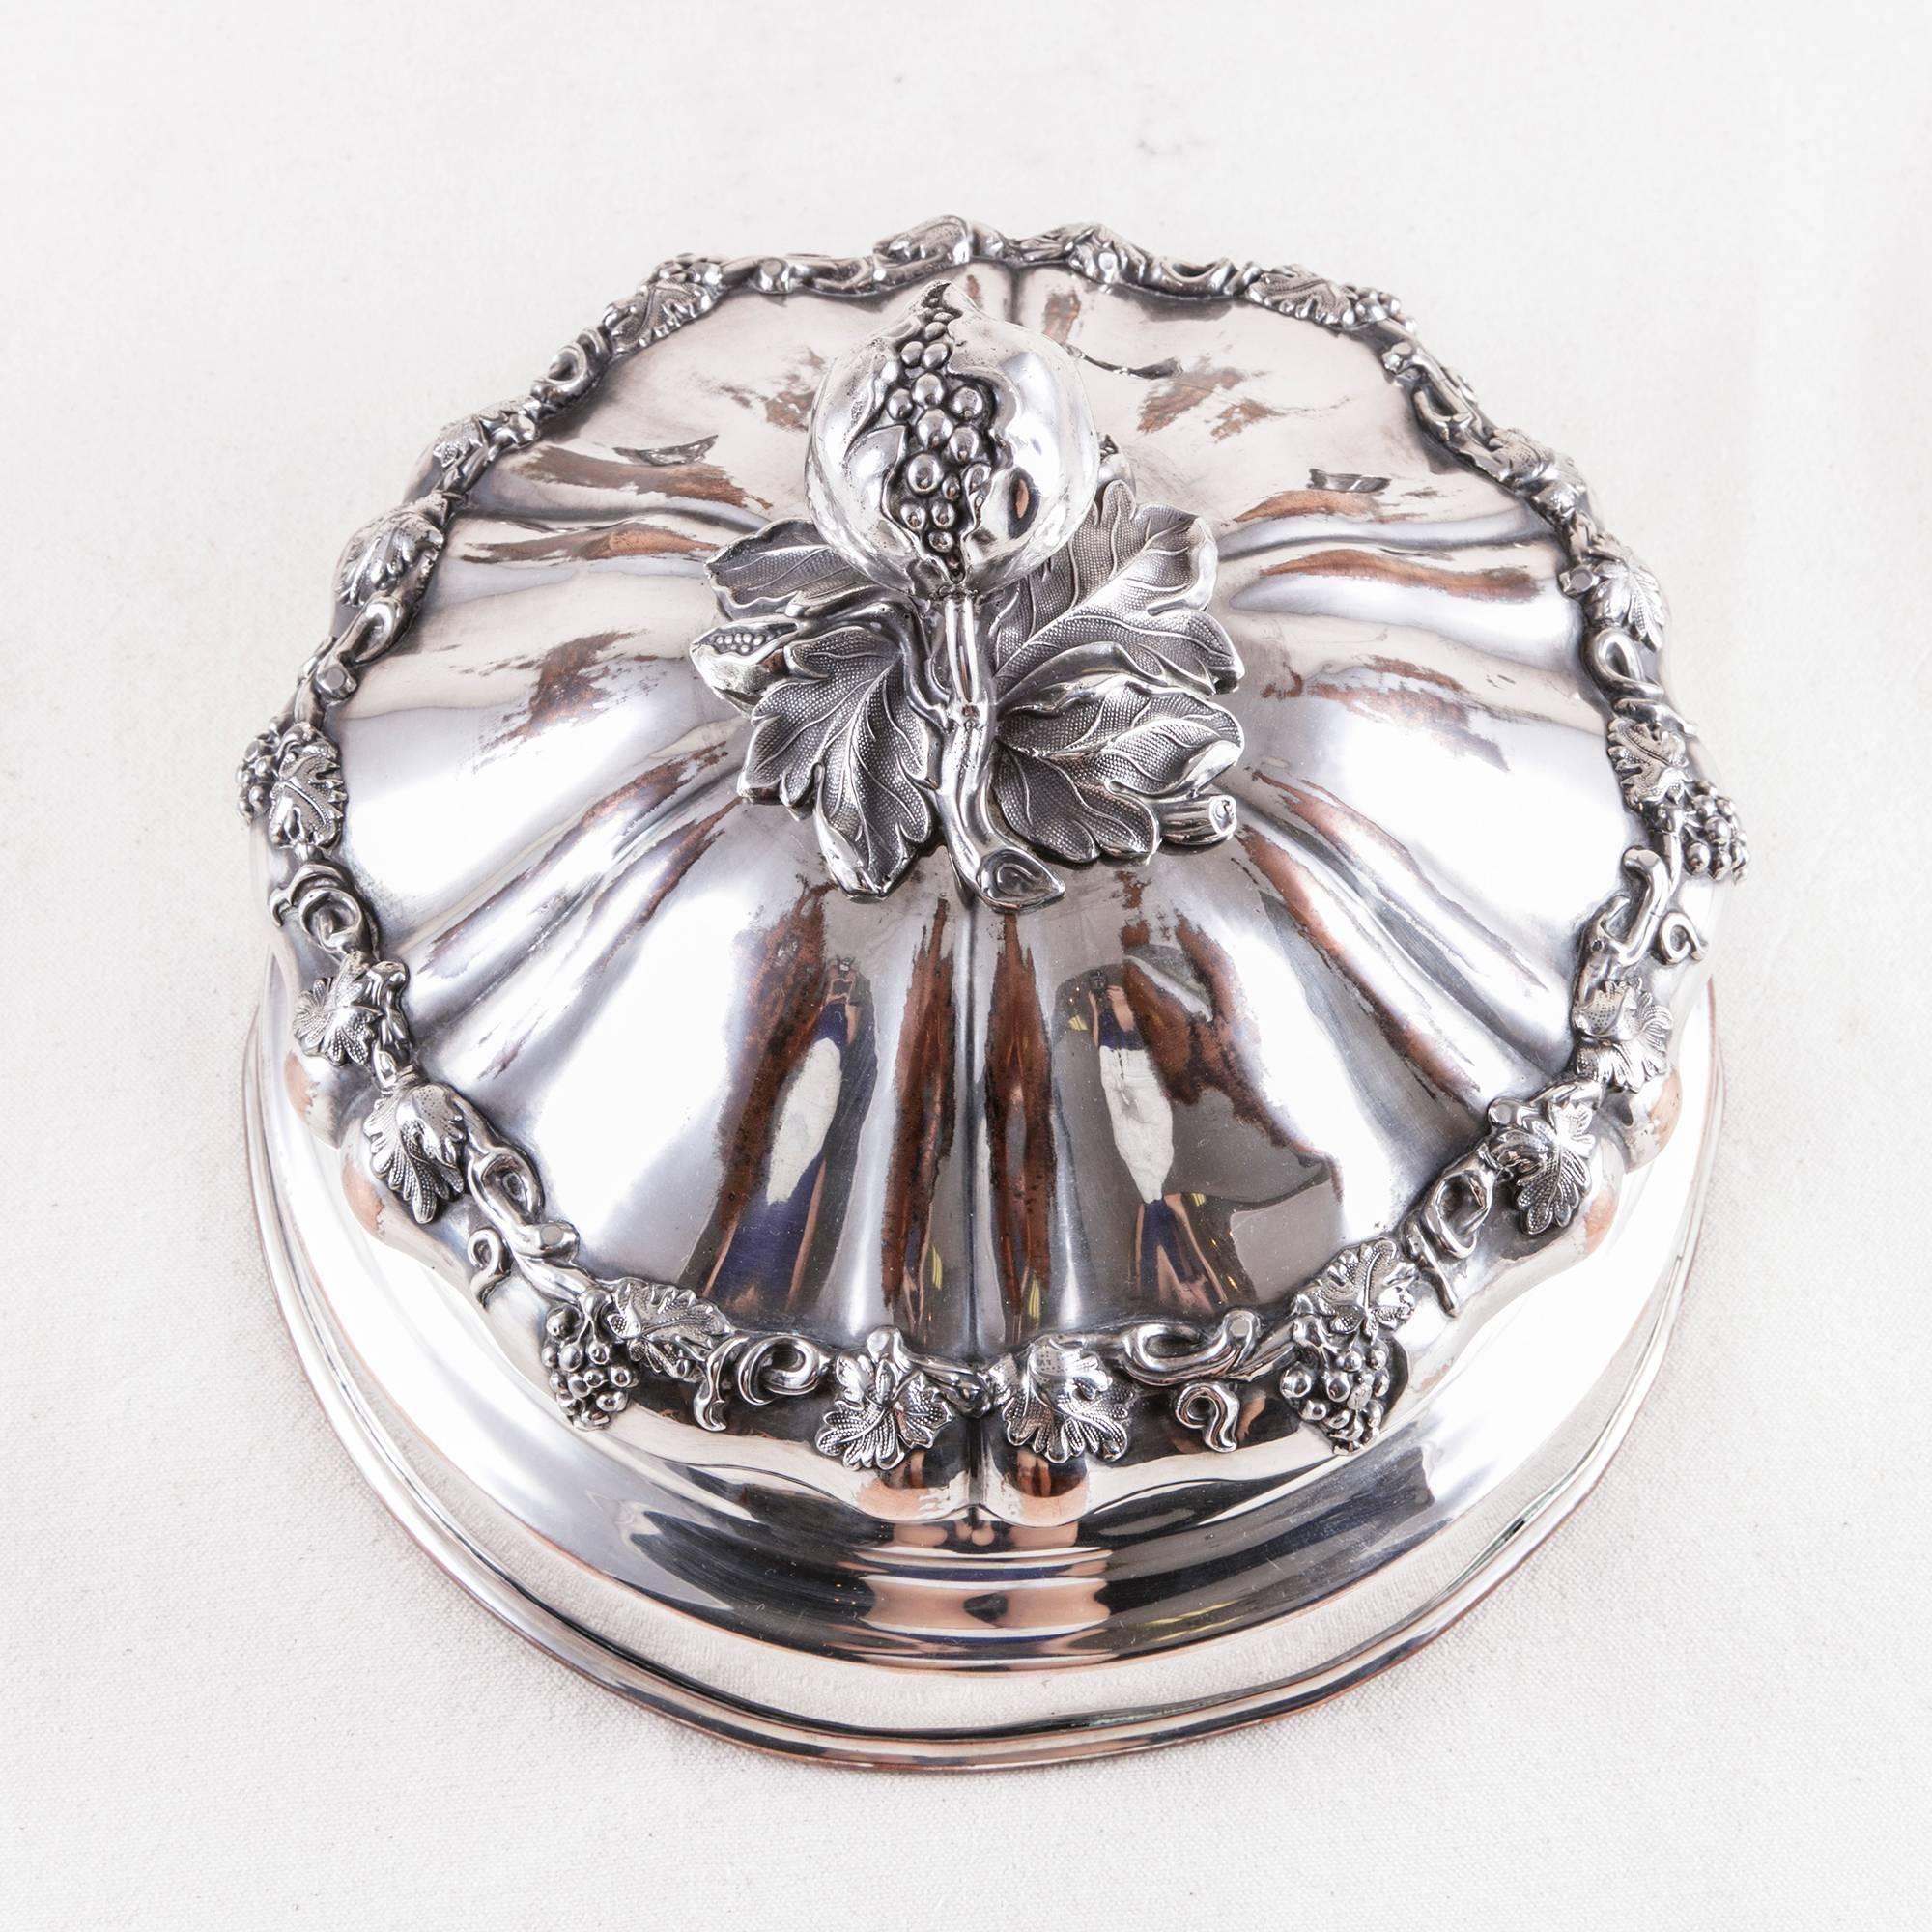 This elegant French hotel dome is lavishly adorned with a band of scrolling grape vines and hanging bunches of grapes. Its top handle is a pomegranate resting on a bed of leaves. Silver plated over copper, this elegant serving piece was originally